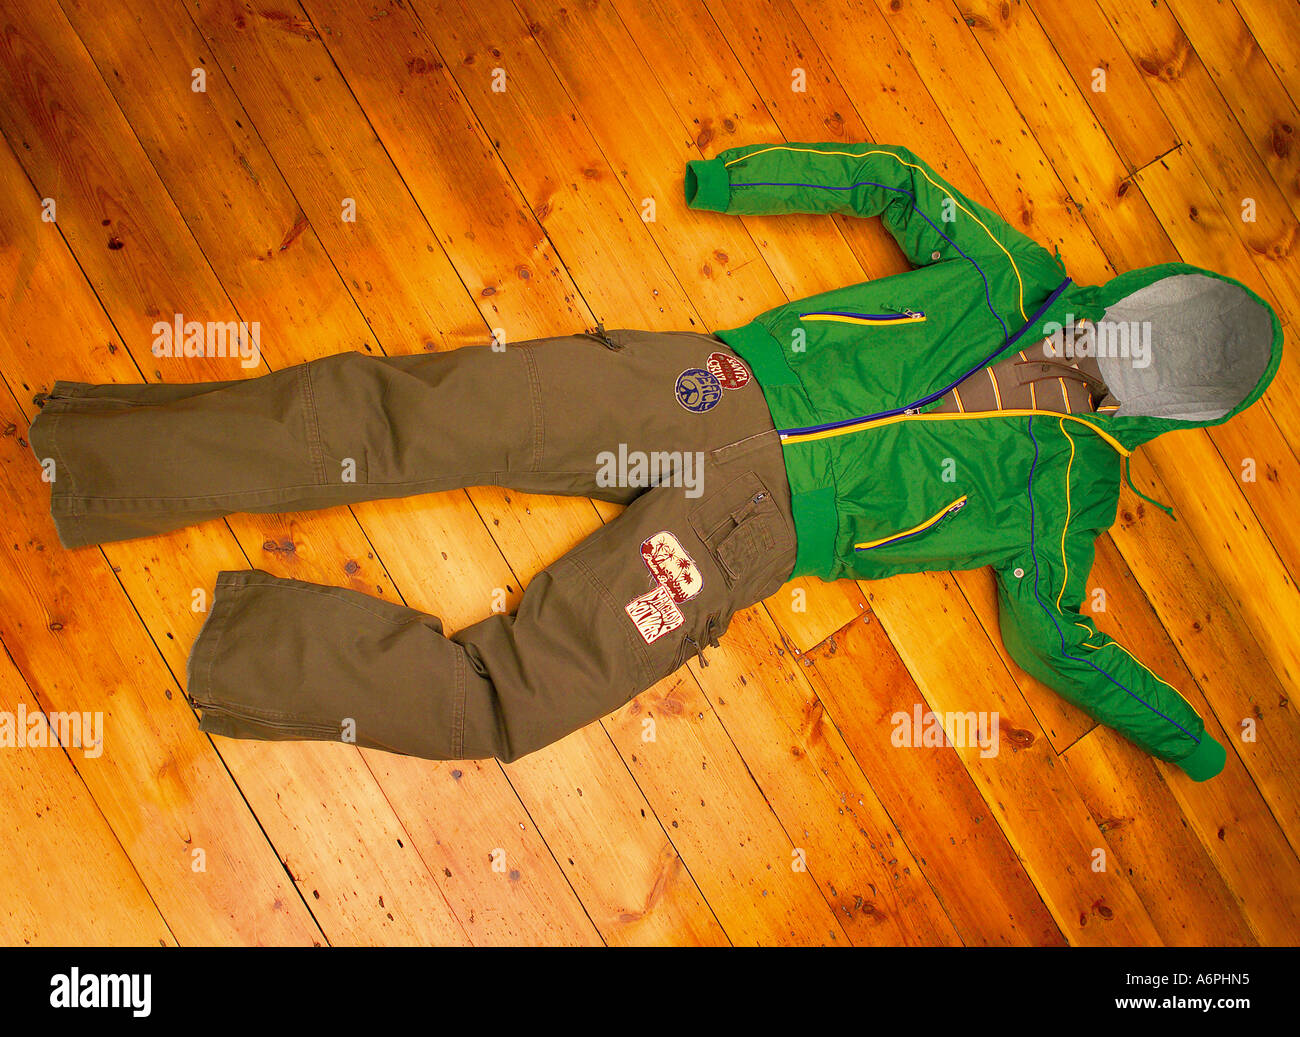 CLOTHES LAYING ON THE FLOOR IN THE SHAPE OF A PERSON, BUT NO ONE WEARING THEM. Stock Photo